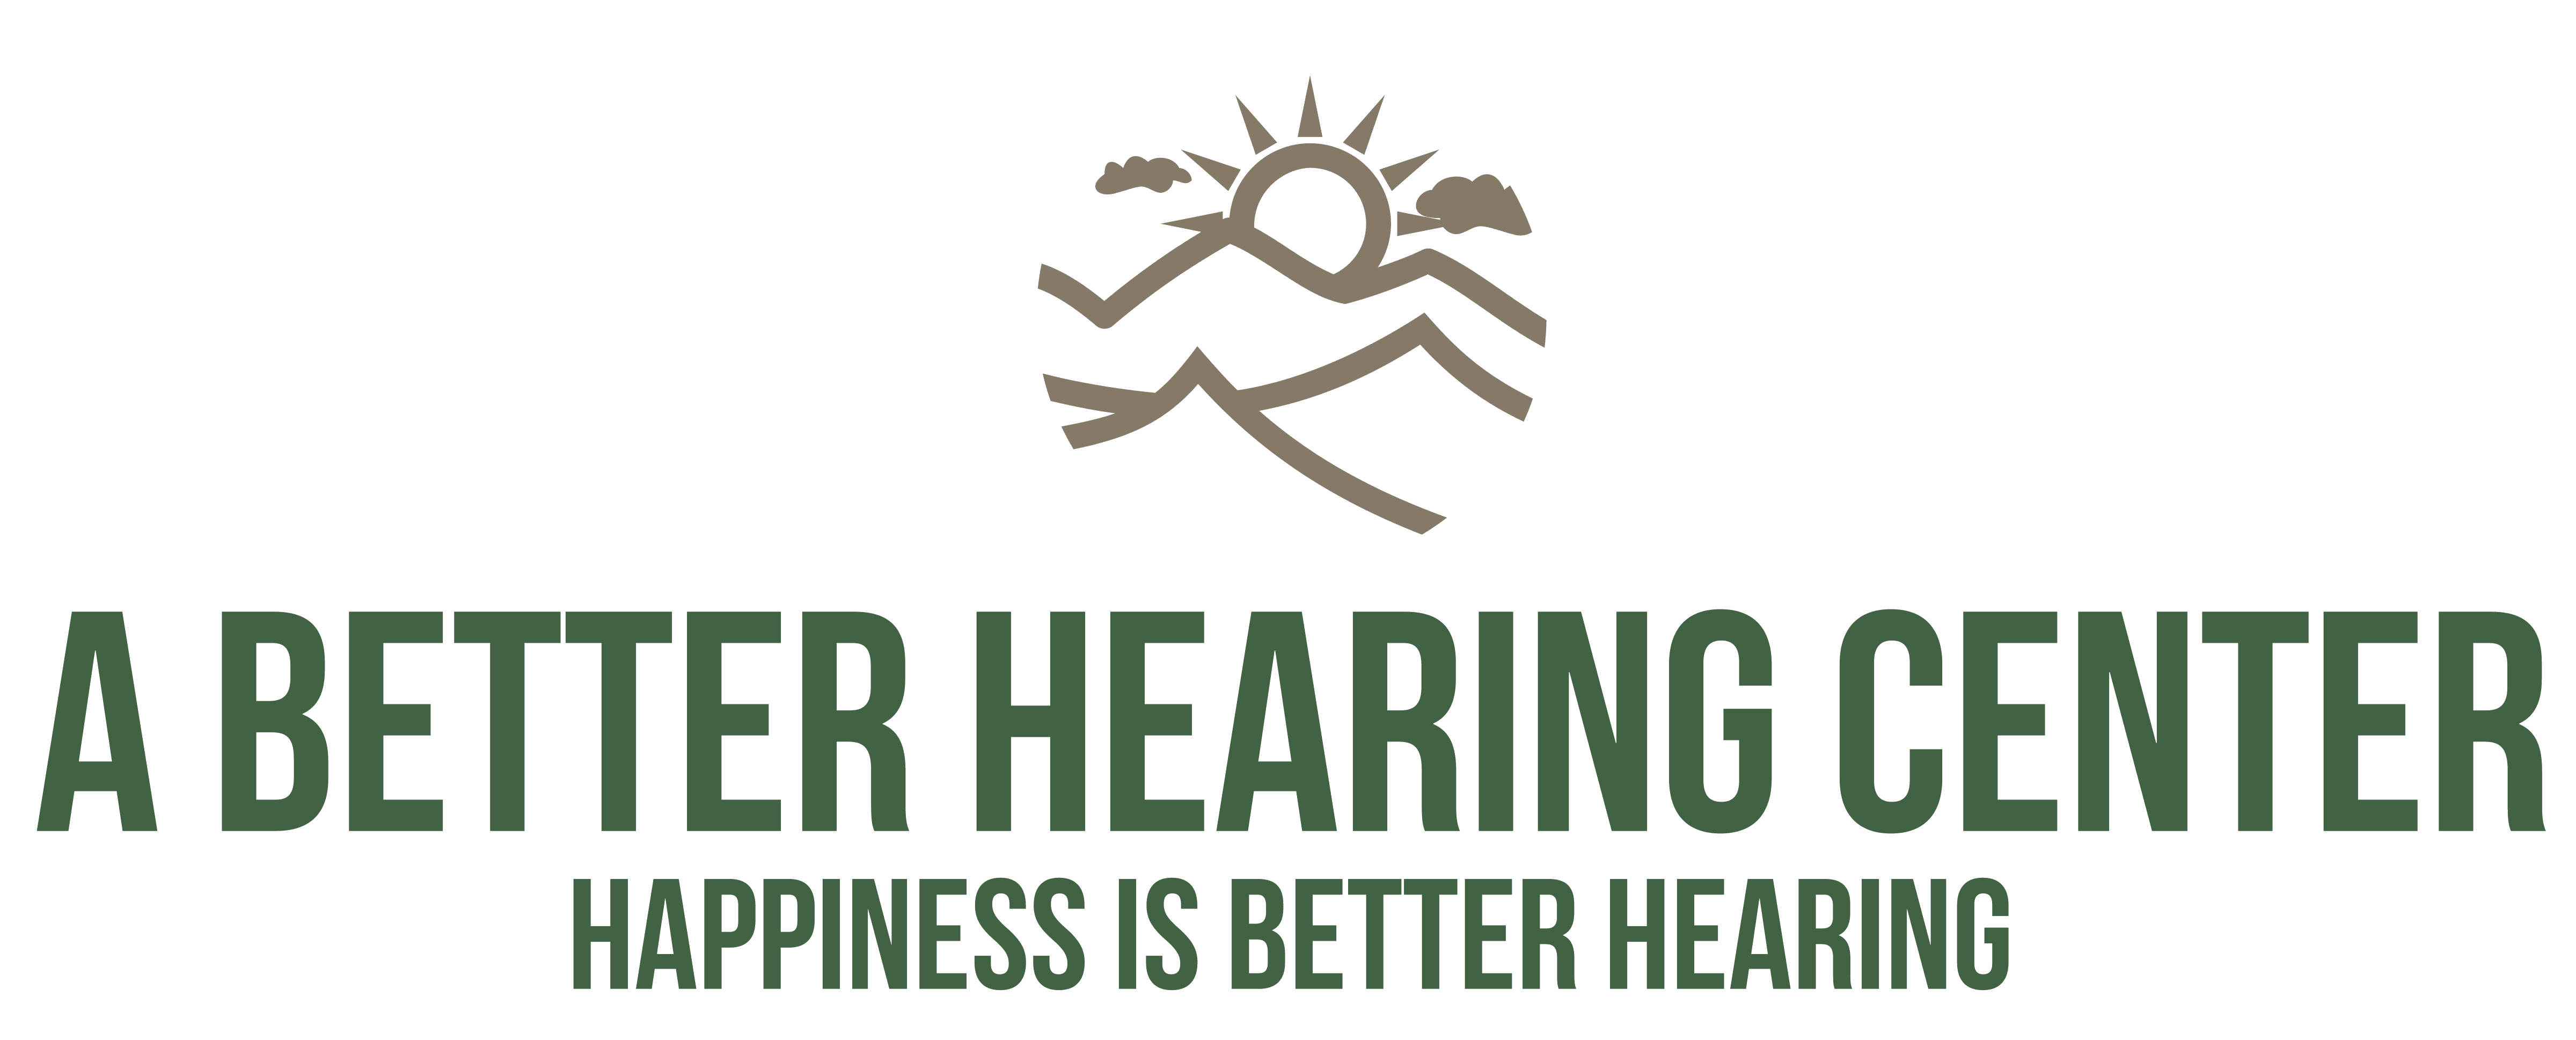 A Better Hearing Care